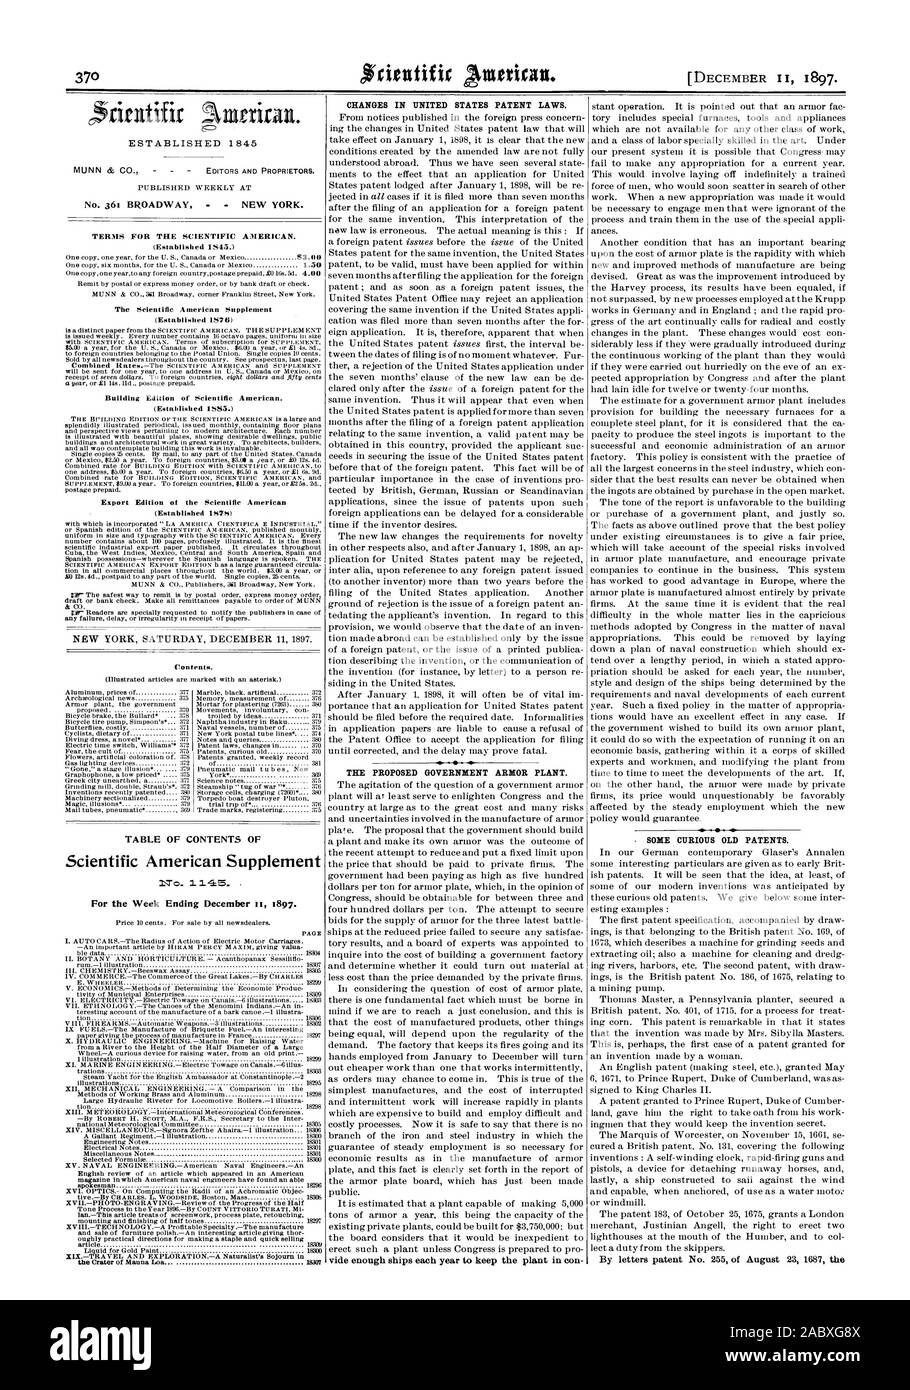 TERMS FOR THE SCIENTIFIC AMERICAN. Building Edition of Scientific American. TABLE OF CONTENTS OF Scientific American Supplement No- 1 1 . For the Week Ending December ii 1897. the Crater of Mauna Loa 18307 CHANGES IN UNITED STATES PATENT LAWS. THE PROPOSED GOVERNMENT ARMOR PLANT. SOME CURIOUS OLD PATENTS., 1897-12-11 Stock Photo